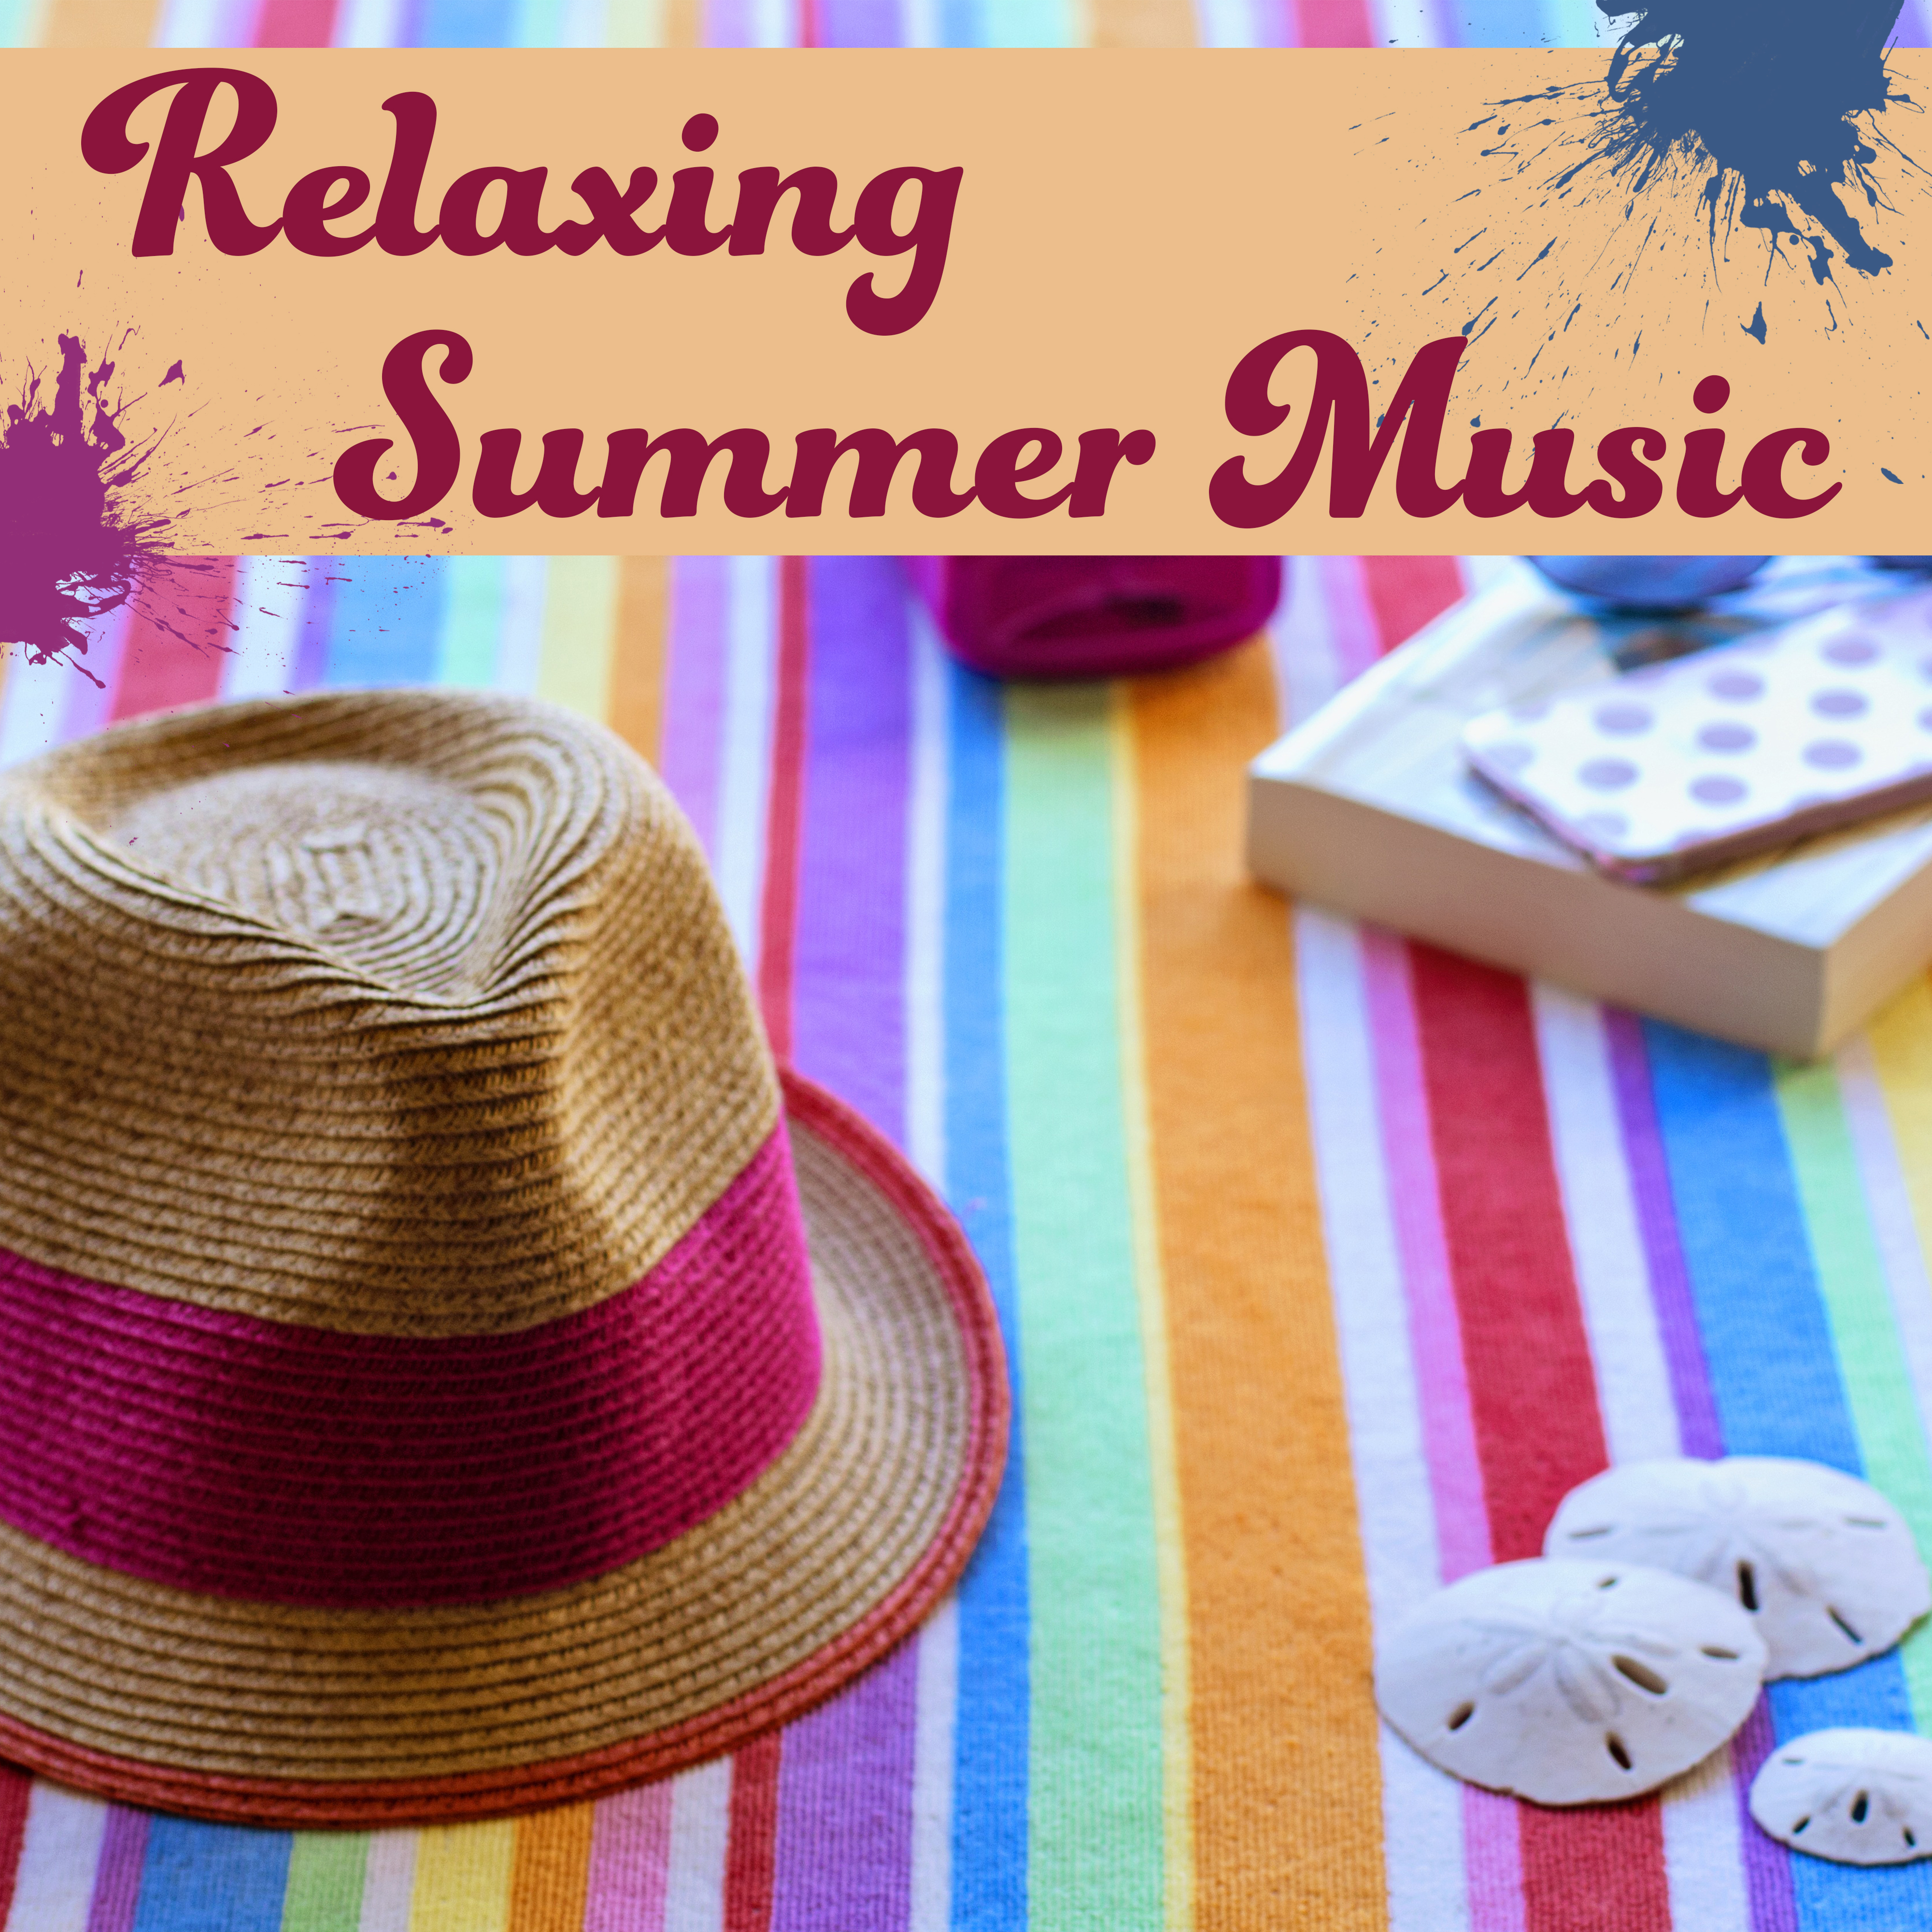 Relaxing Summer Music  Beach Relaxation, Holiday Breeze, Soft Sounds to Relax, Chill Out Lounge